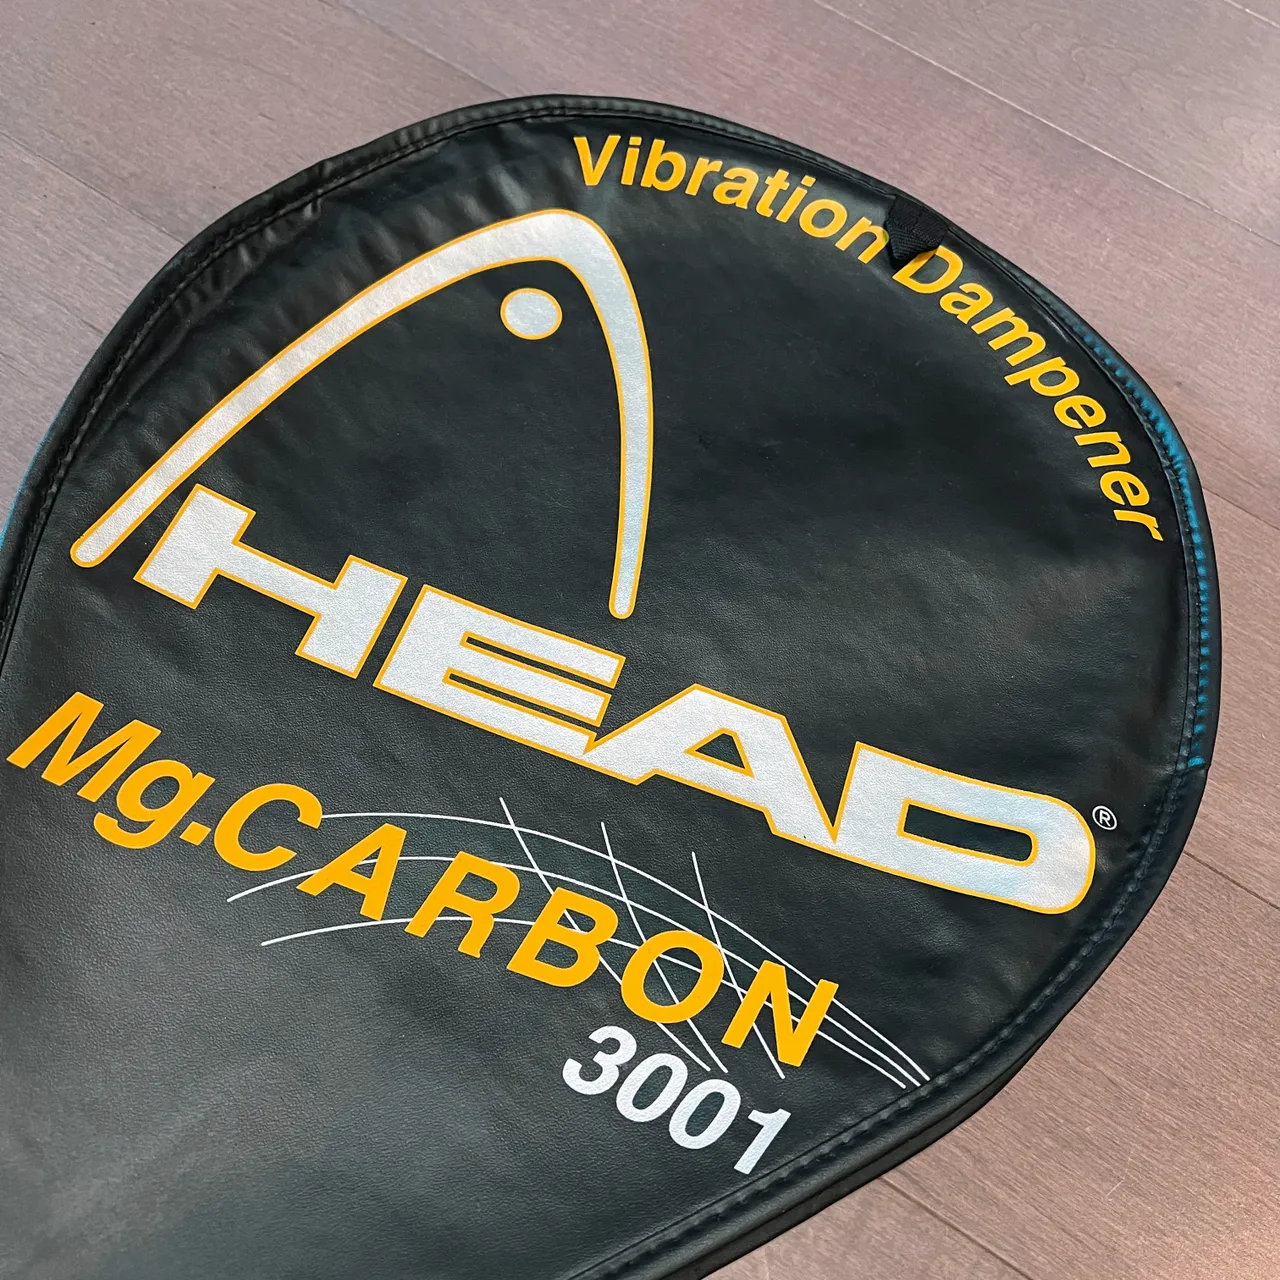 New Tennis Racket w/ Cover photo 4